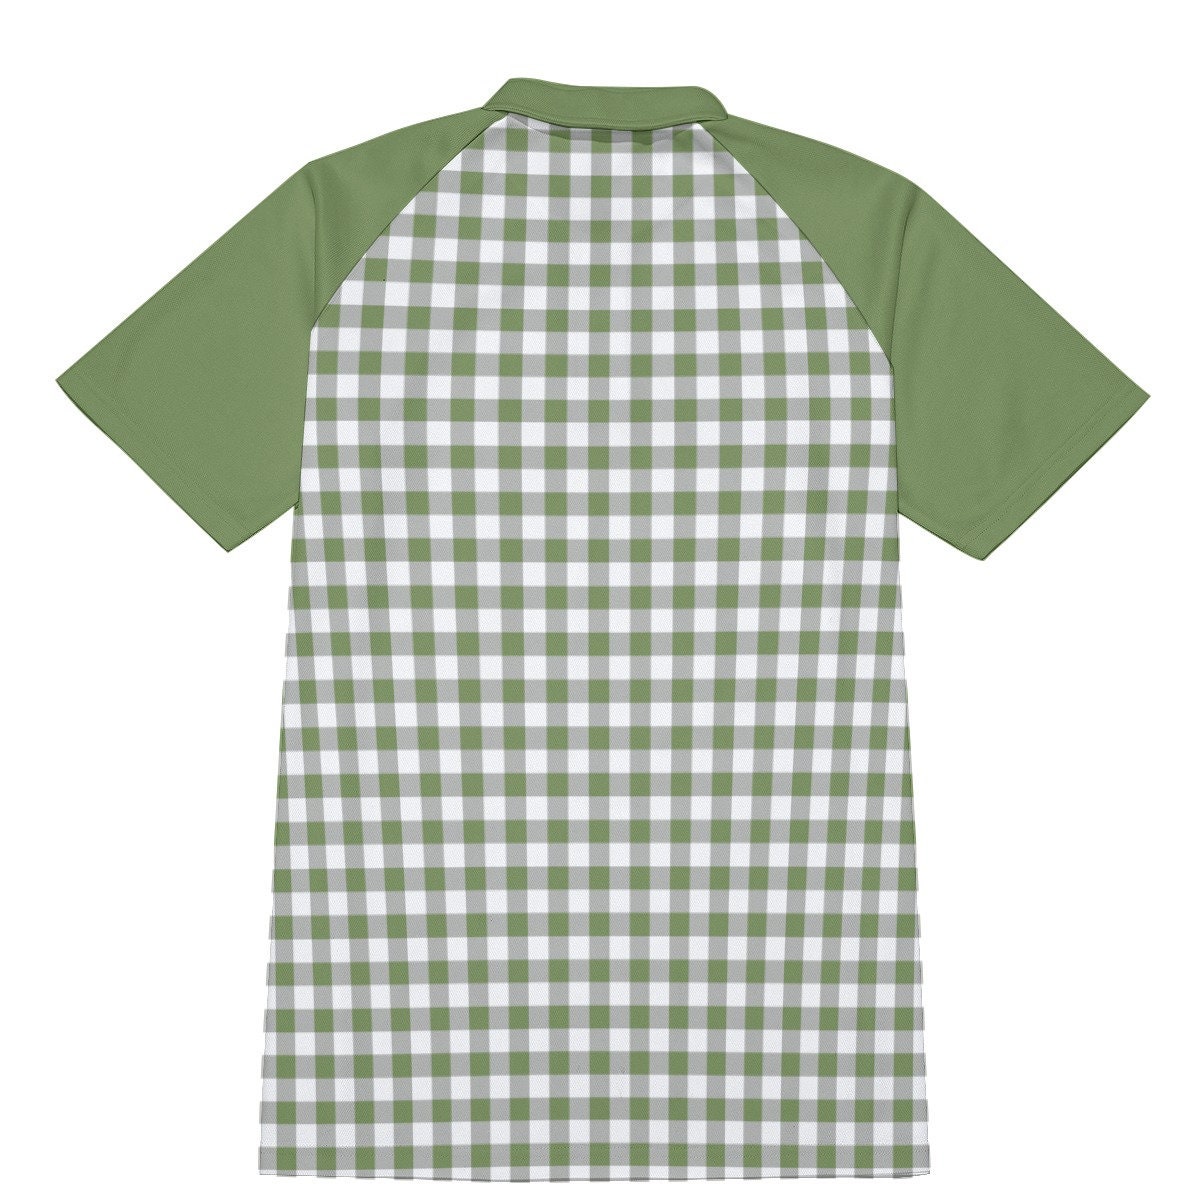 Polo, Polo vert, chemise vintage pour hommes, chemise de style vintage pour hommes, chemise rétro pour hommes, haut pour hommes des années 60, chemise Green Gingham, chemise pour hommes